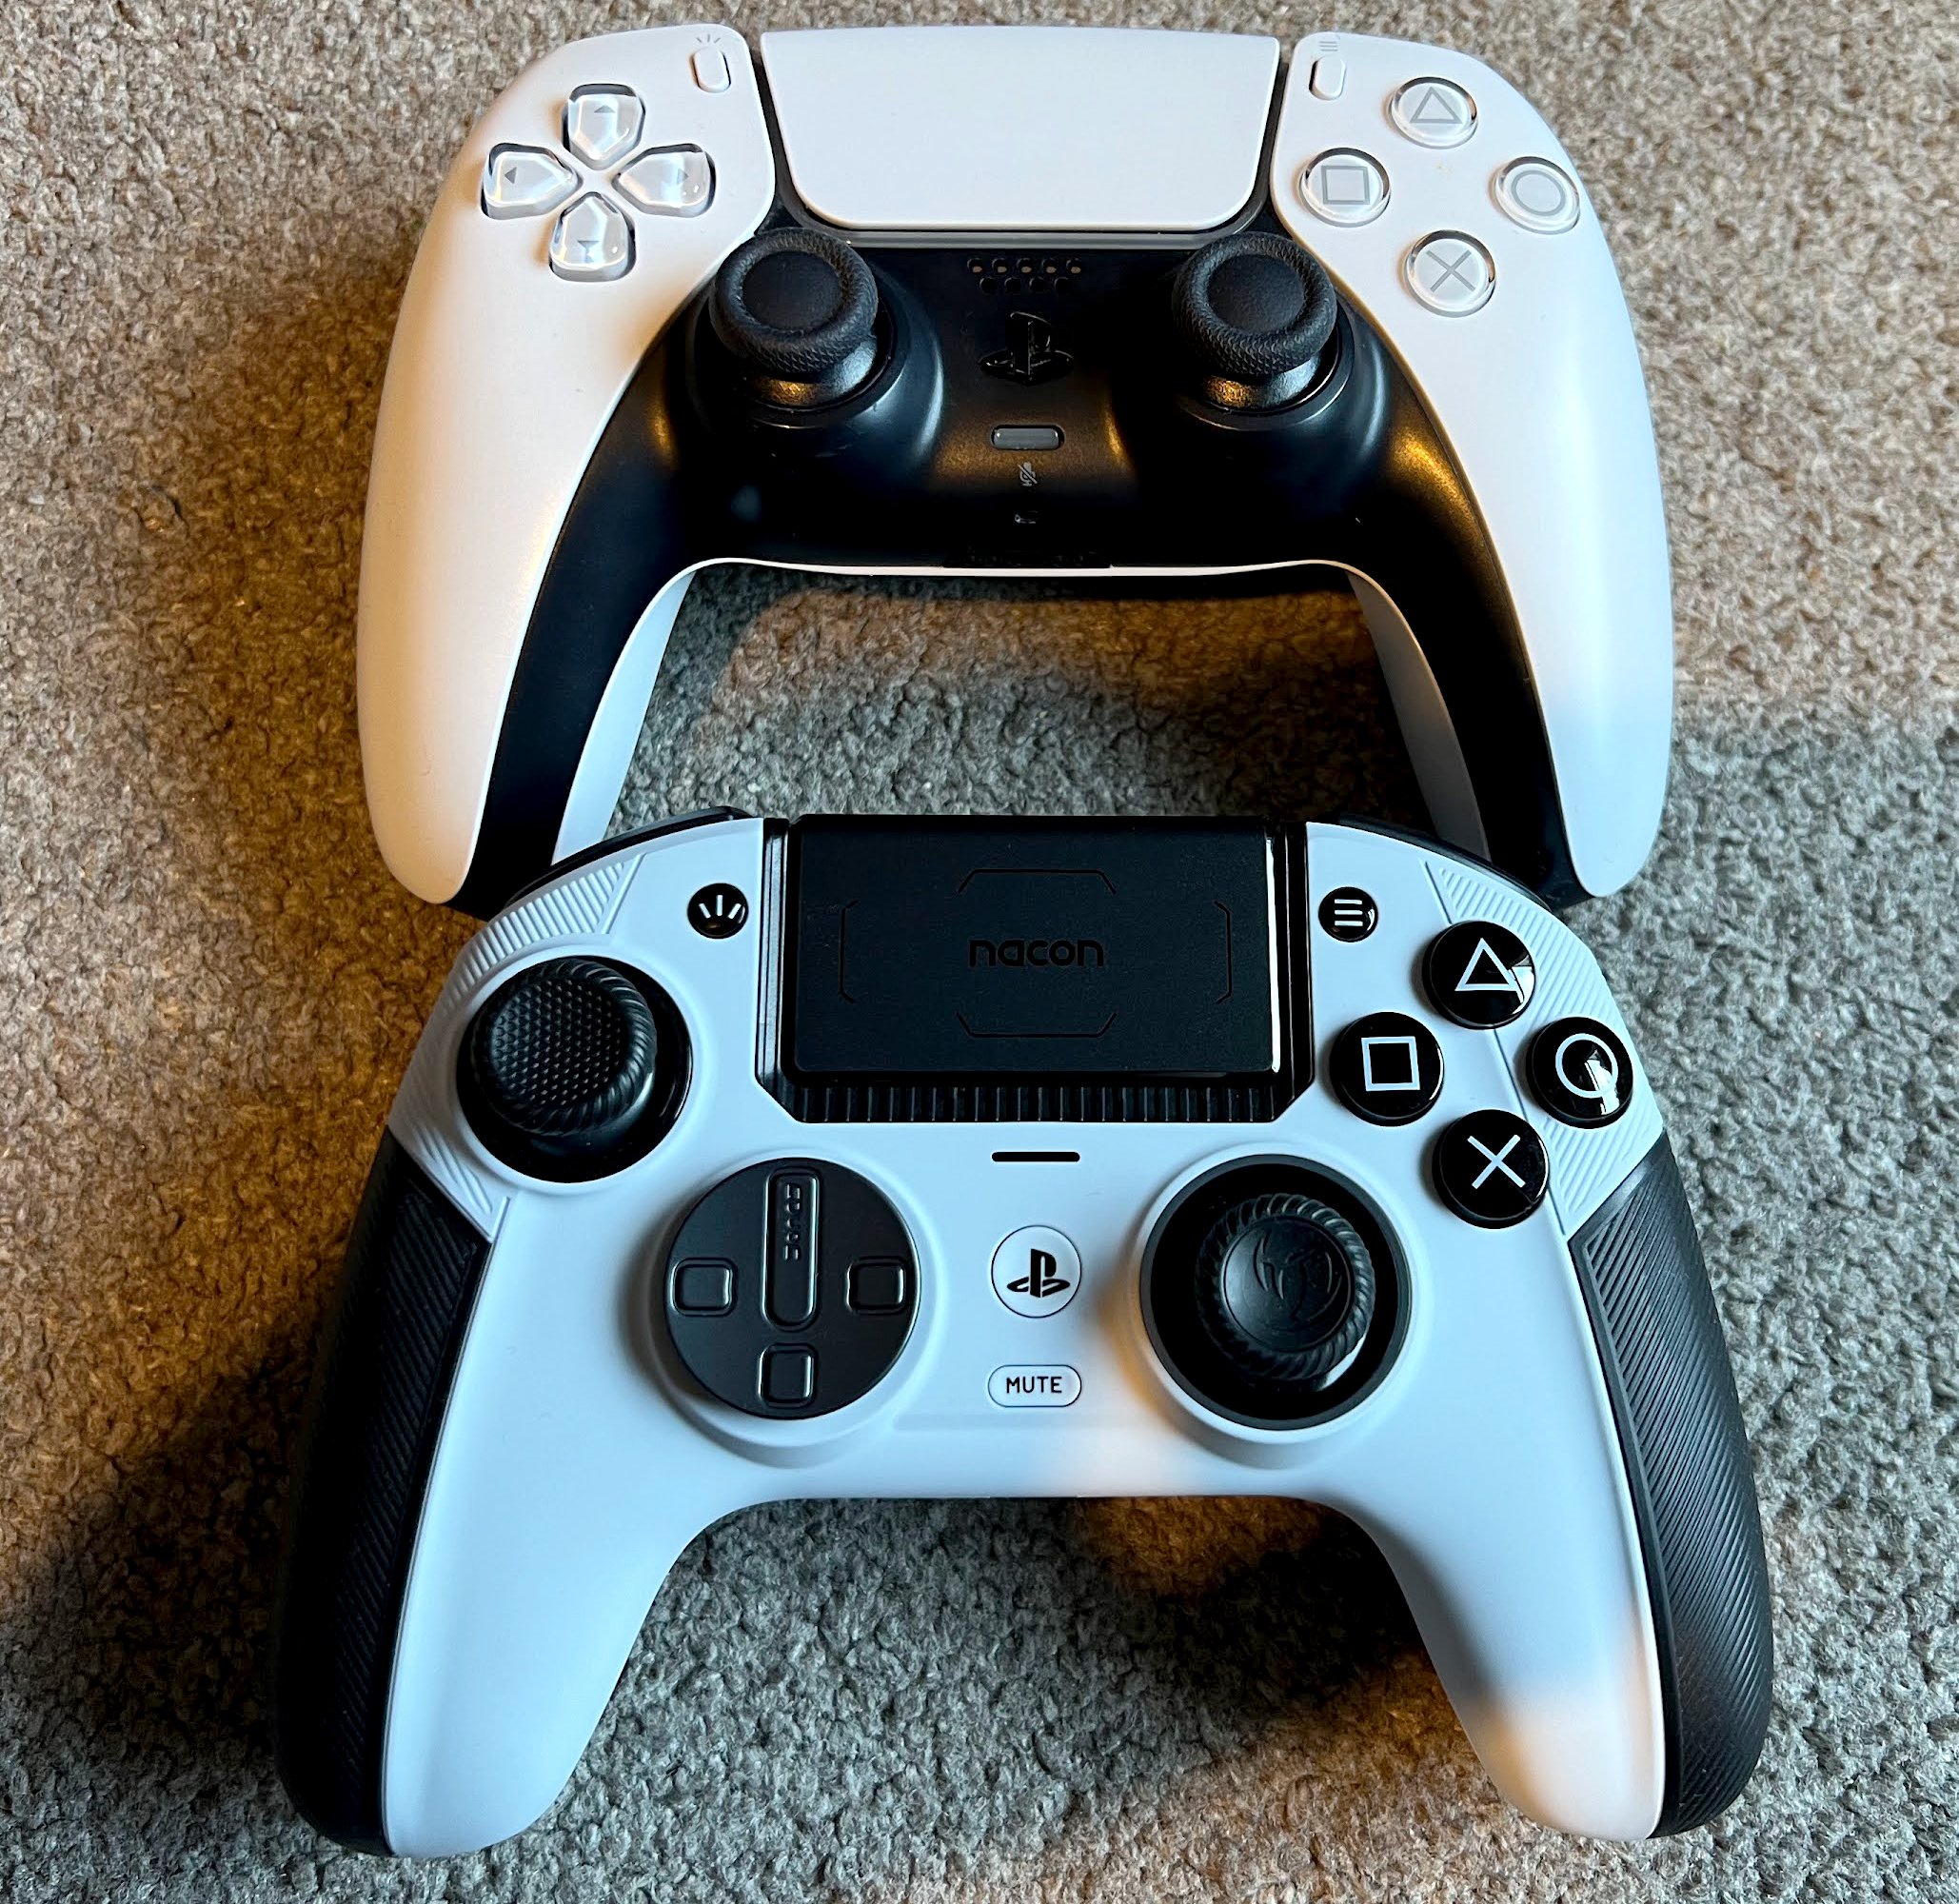 Nacon Revolution 5 Pro is a $200 PS5 controller that's been hamstrung by  Sony